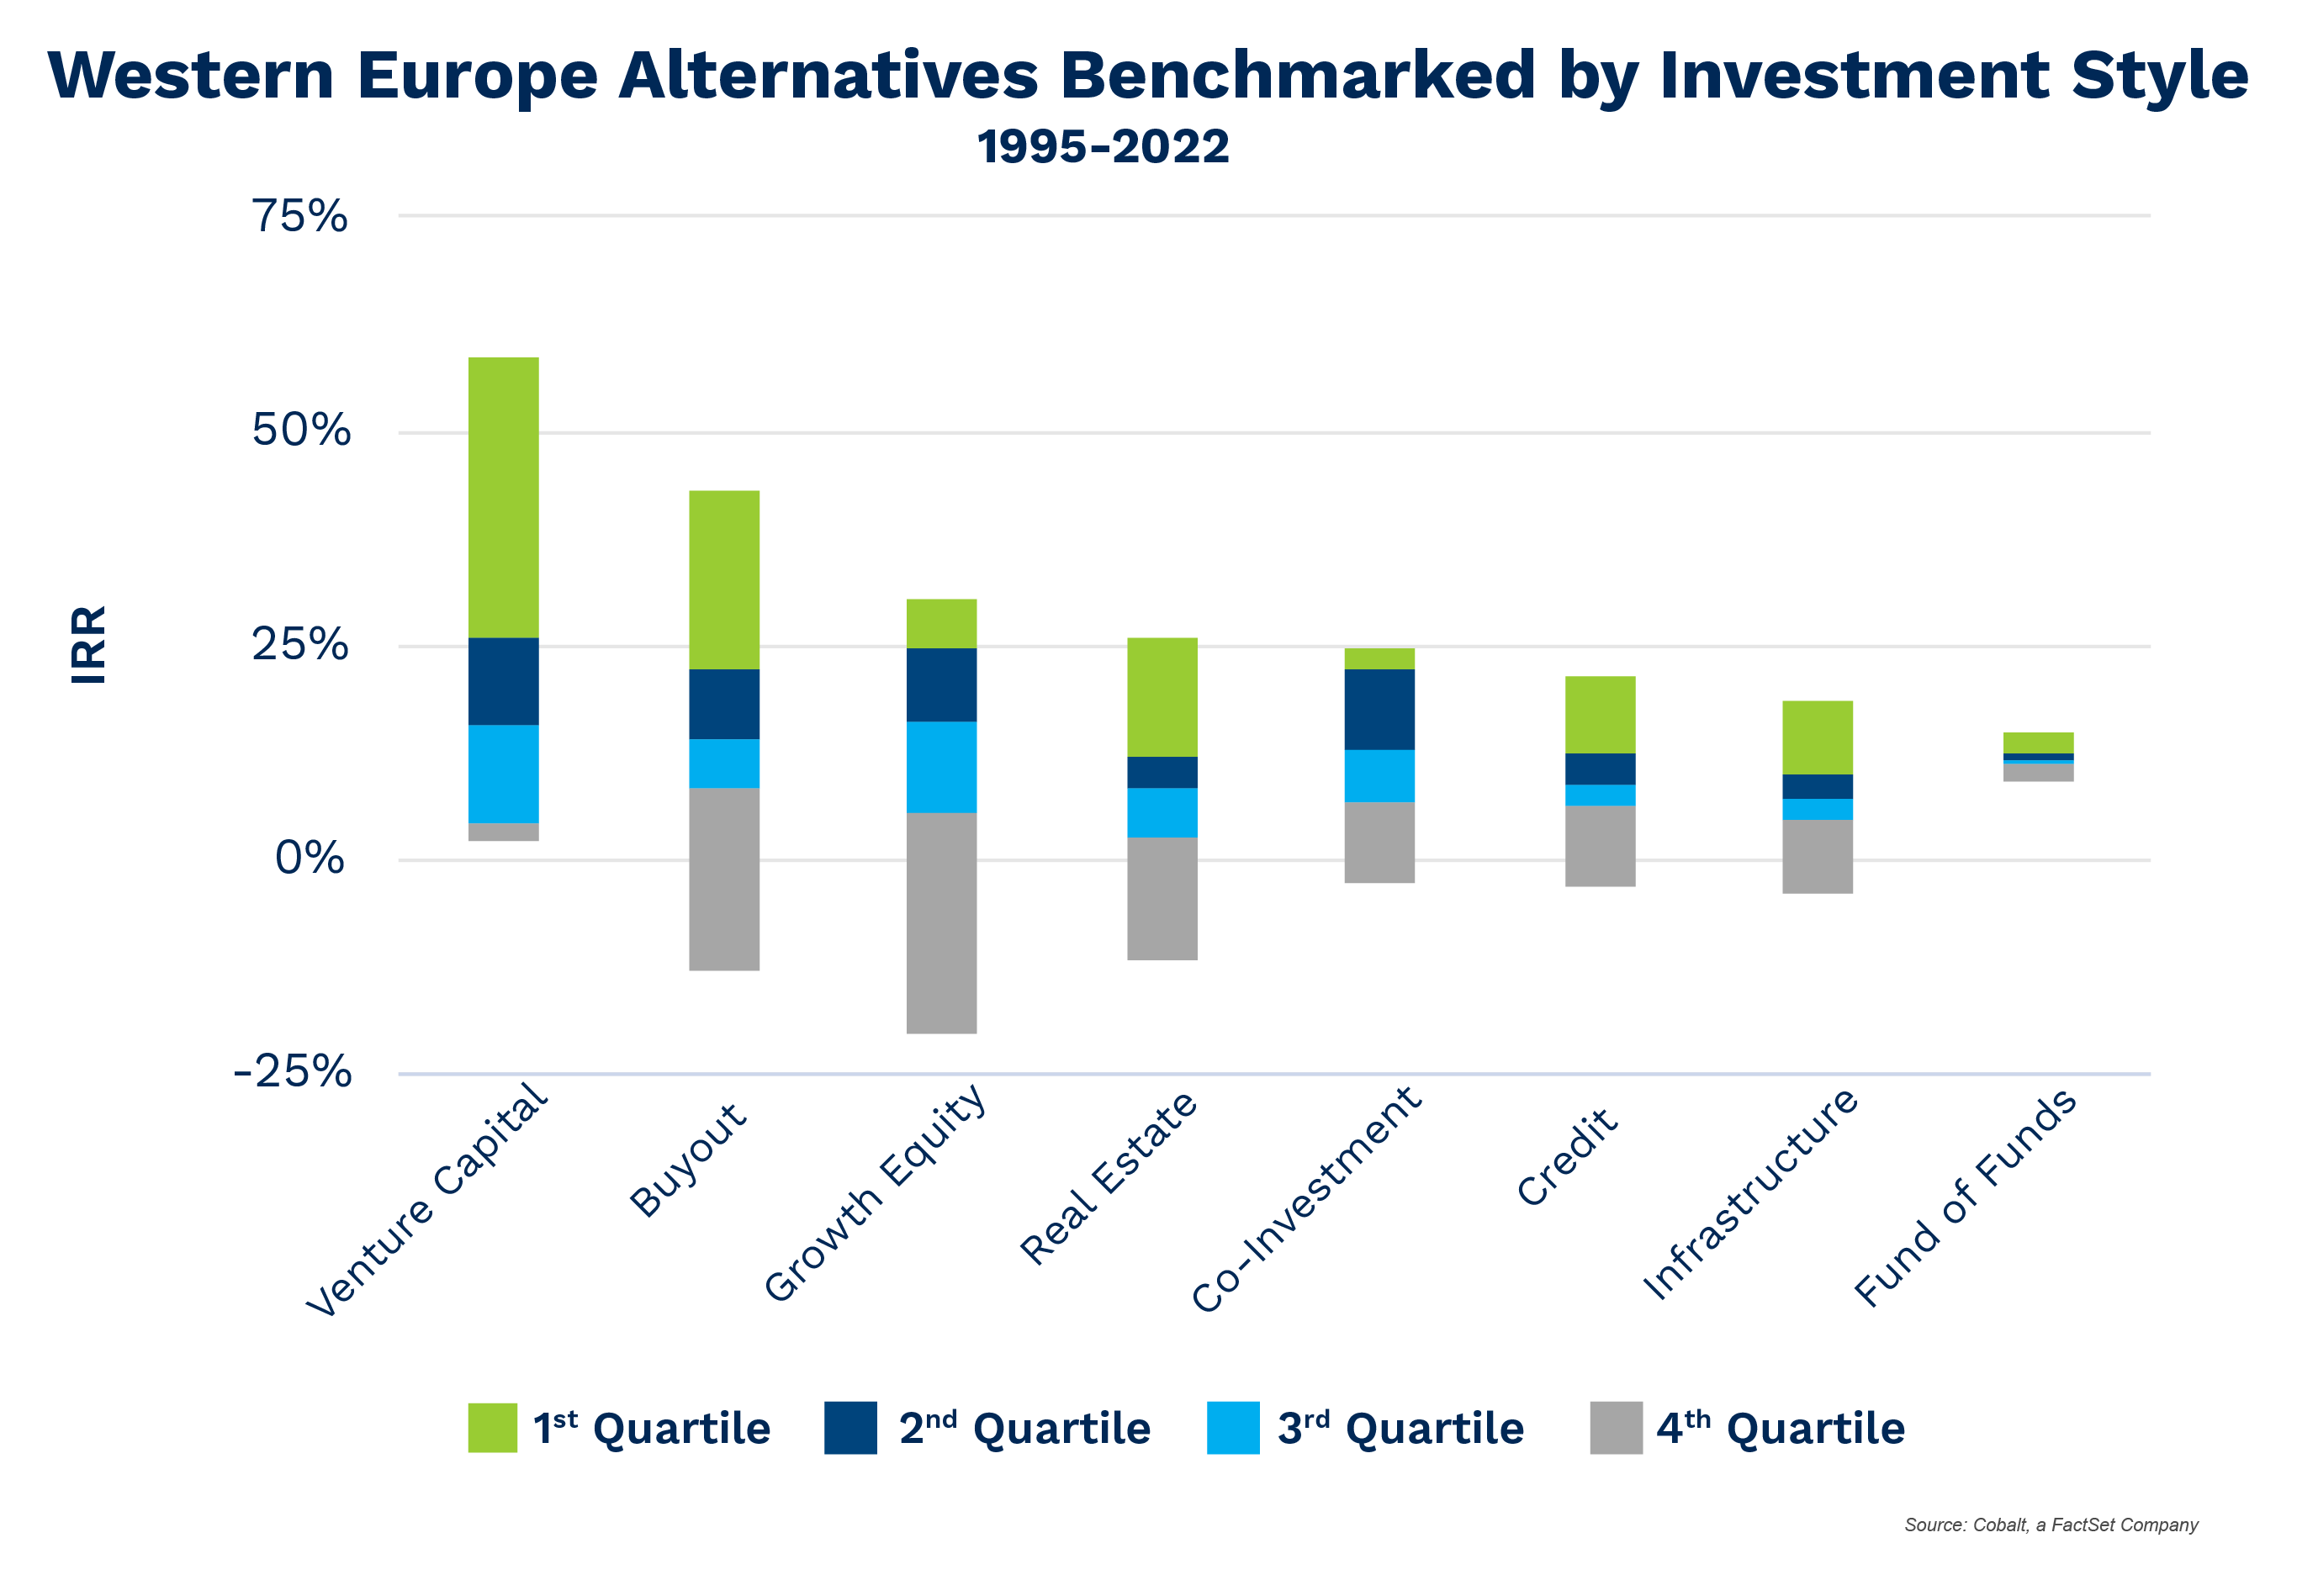 01-western-europe-alternatives-benchmarked-by-investment-style-1995-to-2022